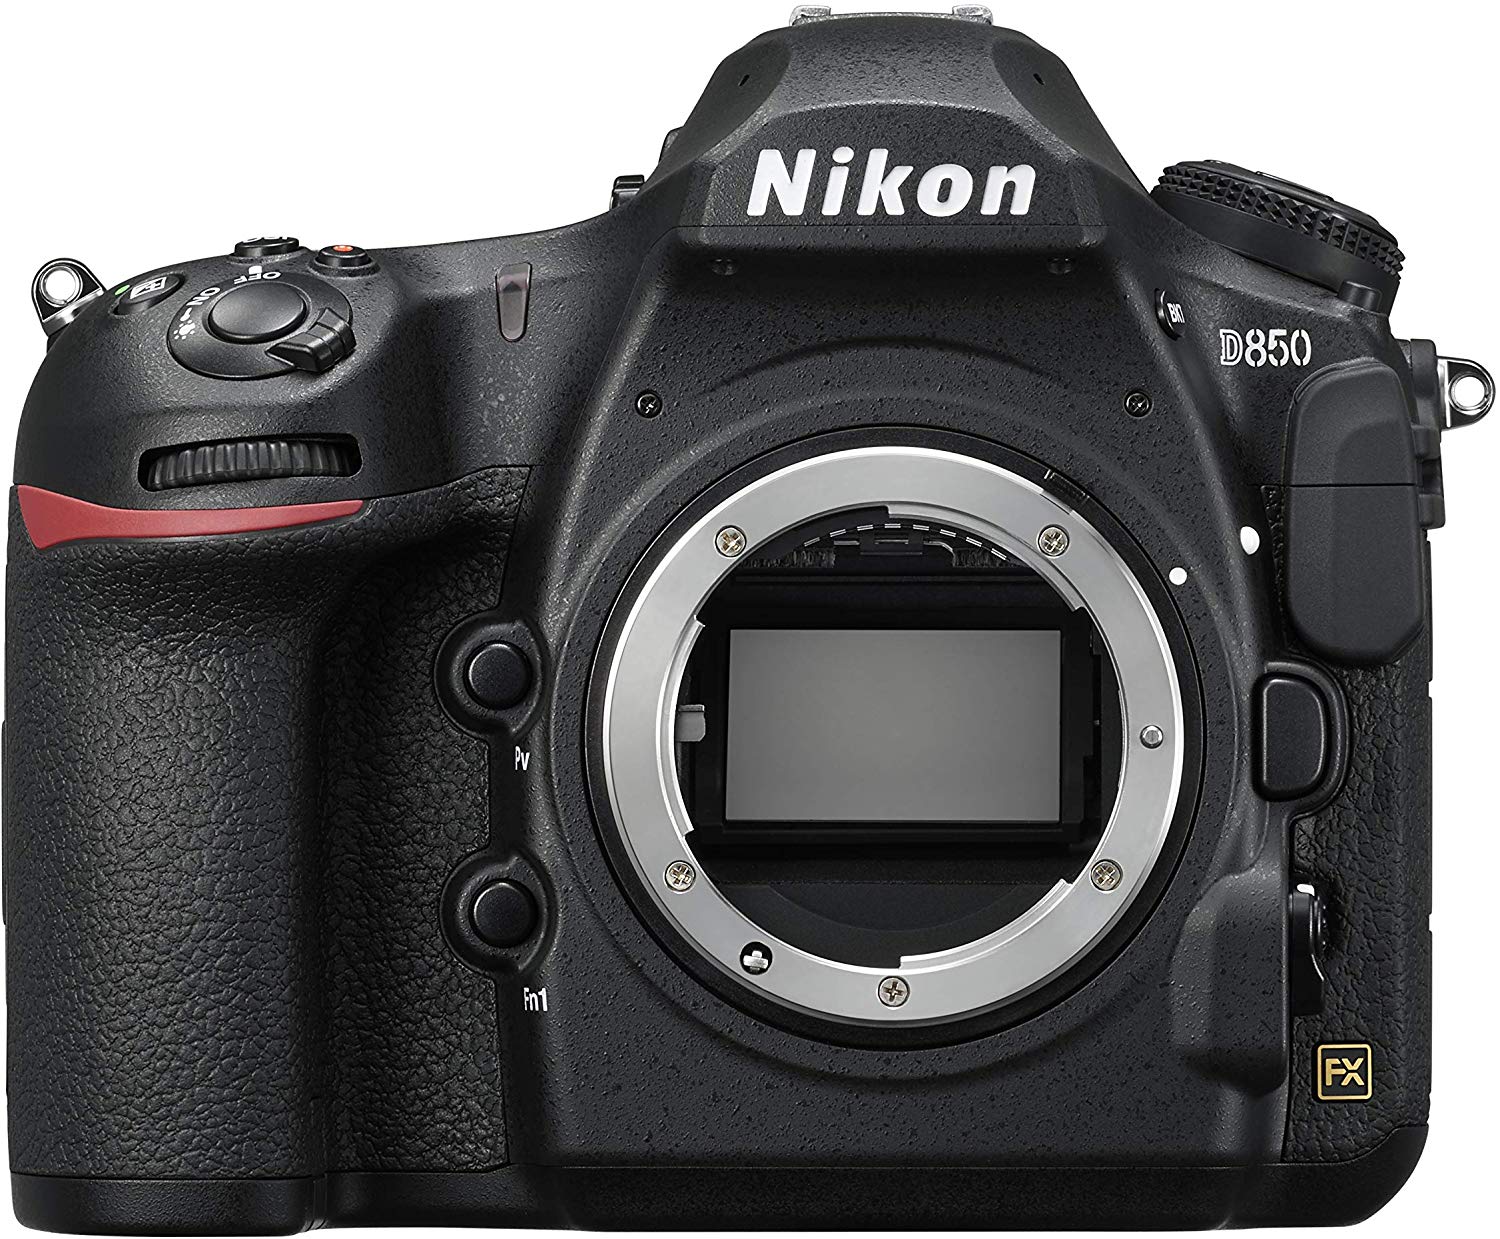 the nikon d850 dslr is one of the best dslr travel cameras